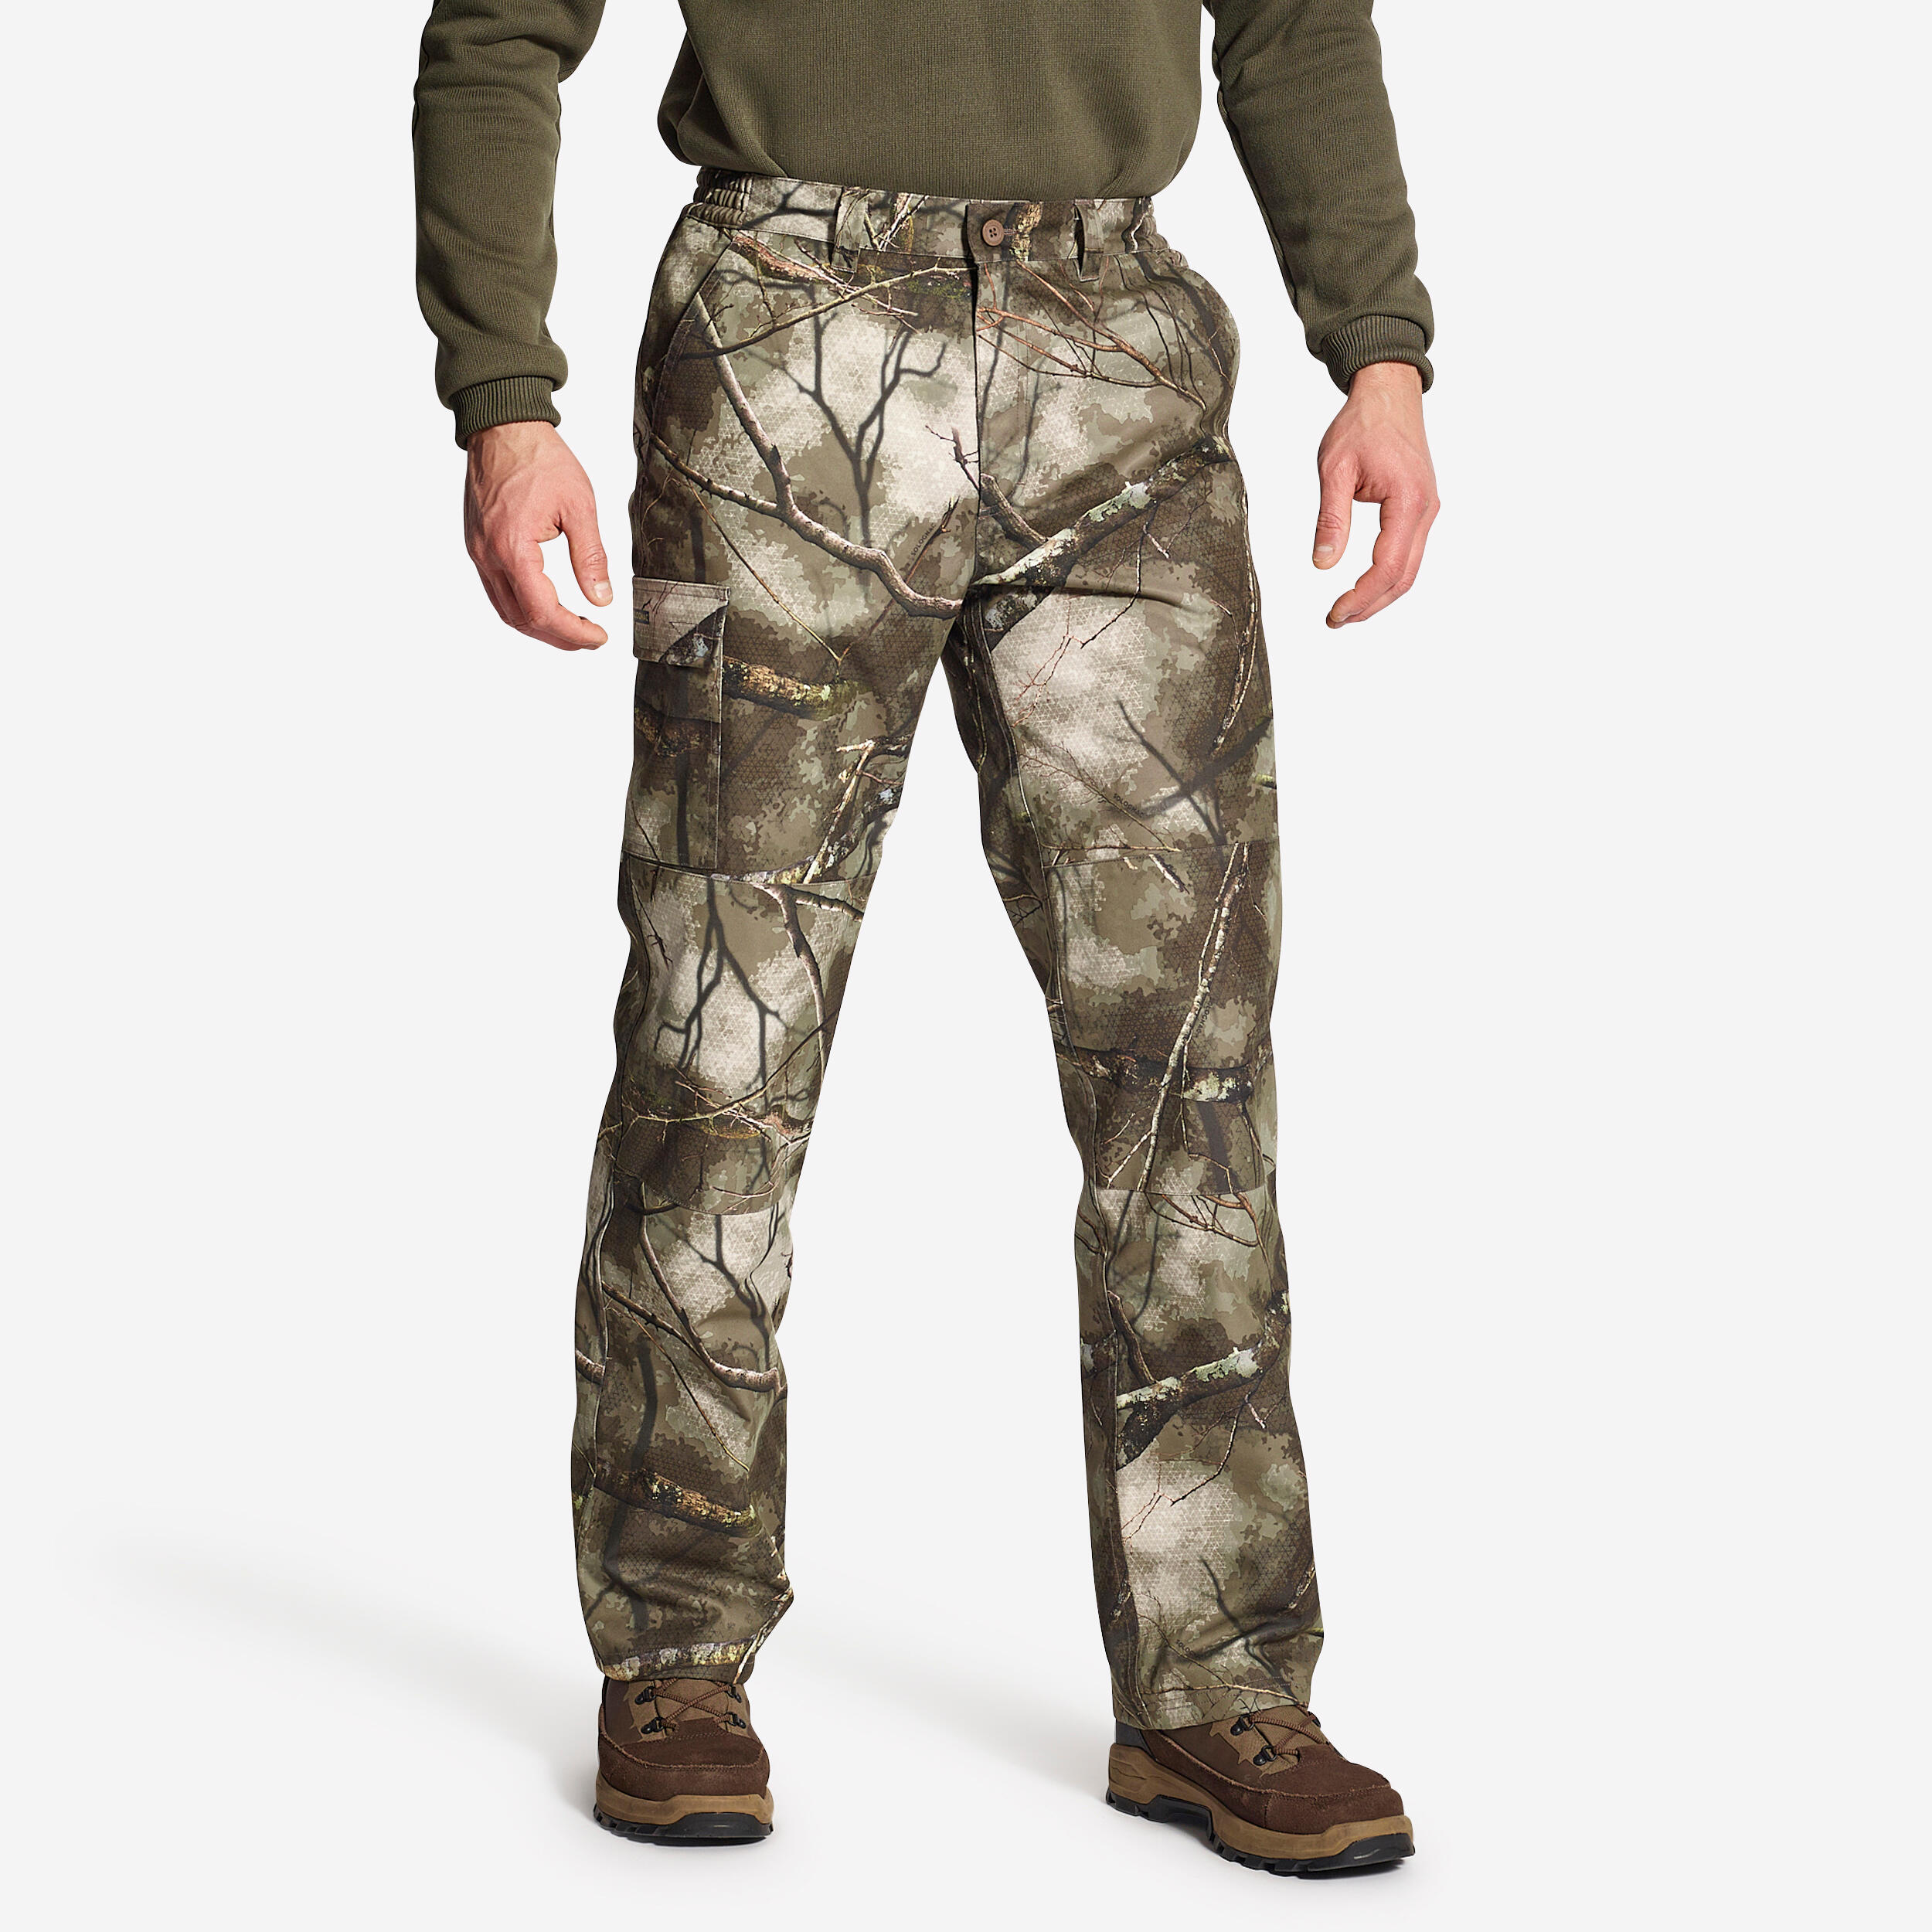 Breathable Hunting Trousers - Treemetic 500 Camouflage - Camouflage, Deep  shale - Solognac - Decathlon